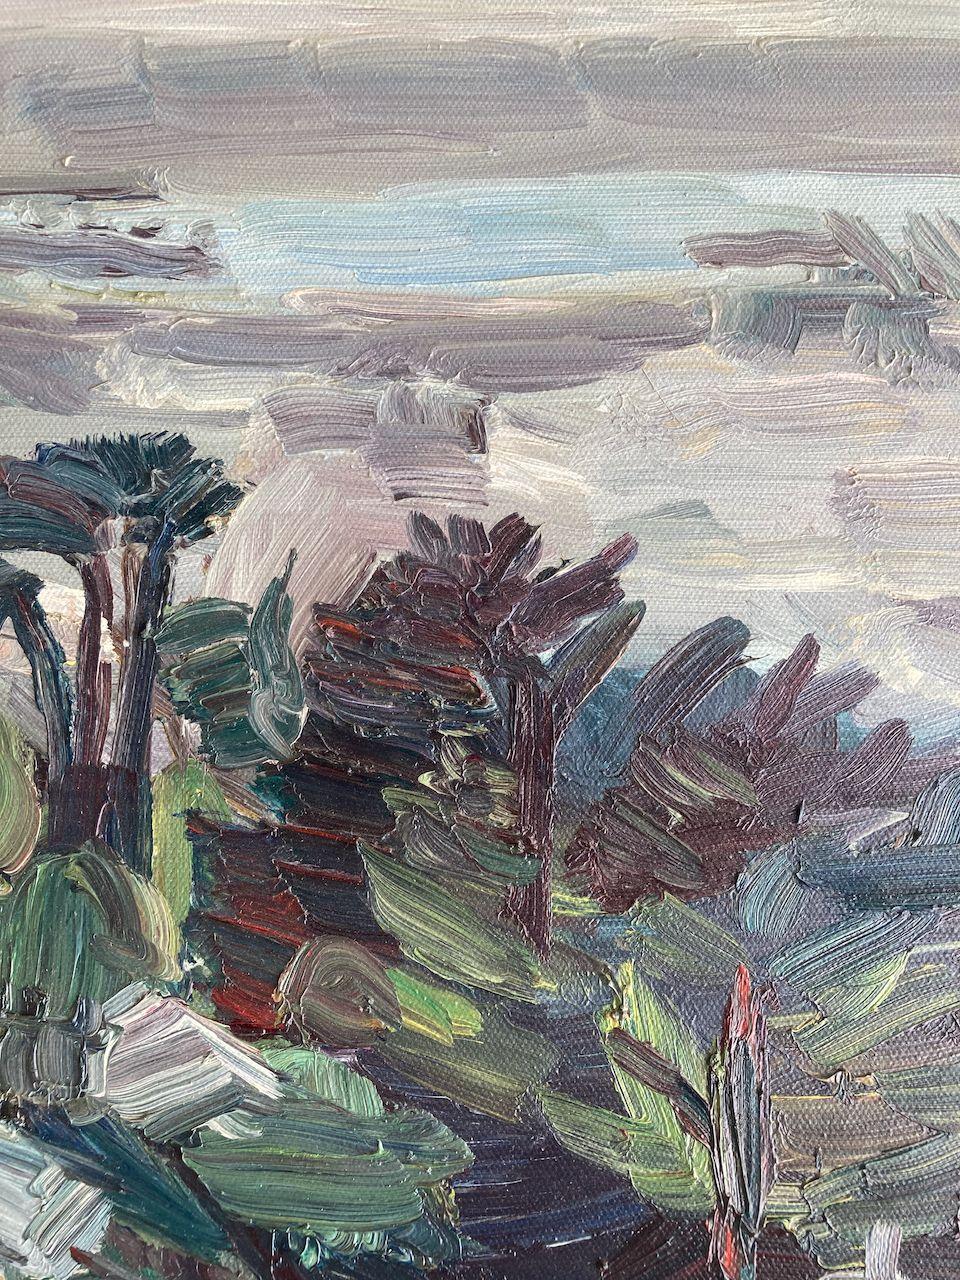 Plein air oil painting of the San Francisco Bay from Skyline Blvd in Oakland, California. I am not sure the exact date but I think it was around 1995. :: Painting :: Impressionist :: This piece comes with an official certificate of authenticity